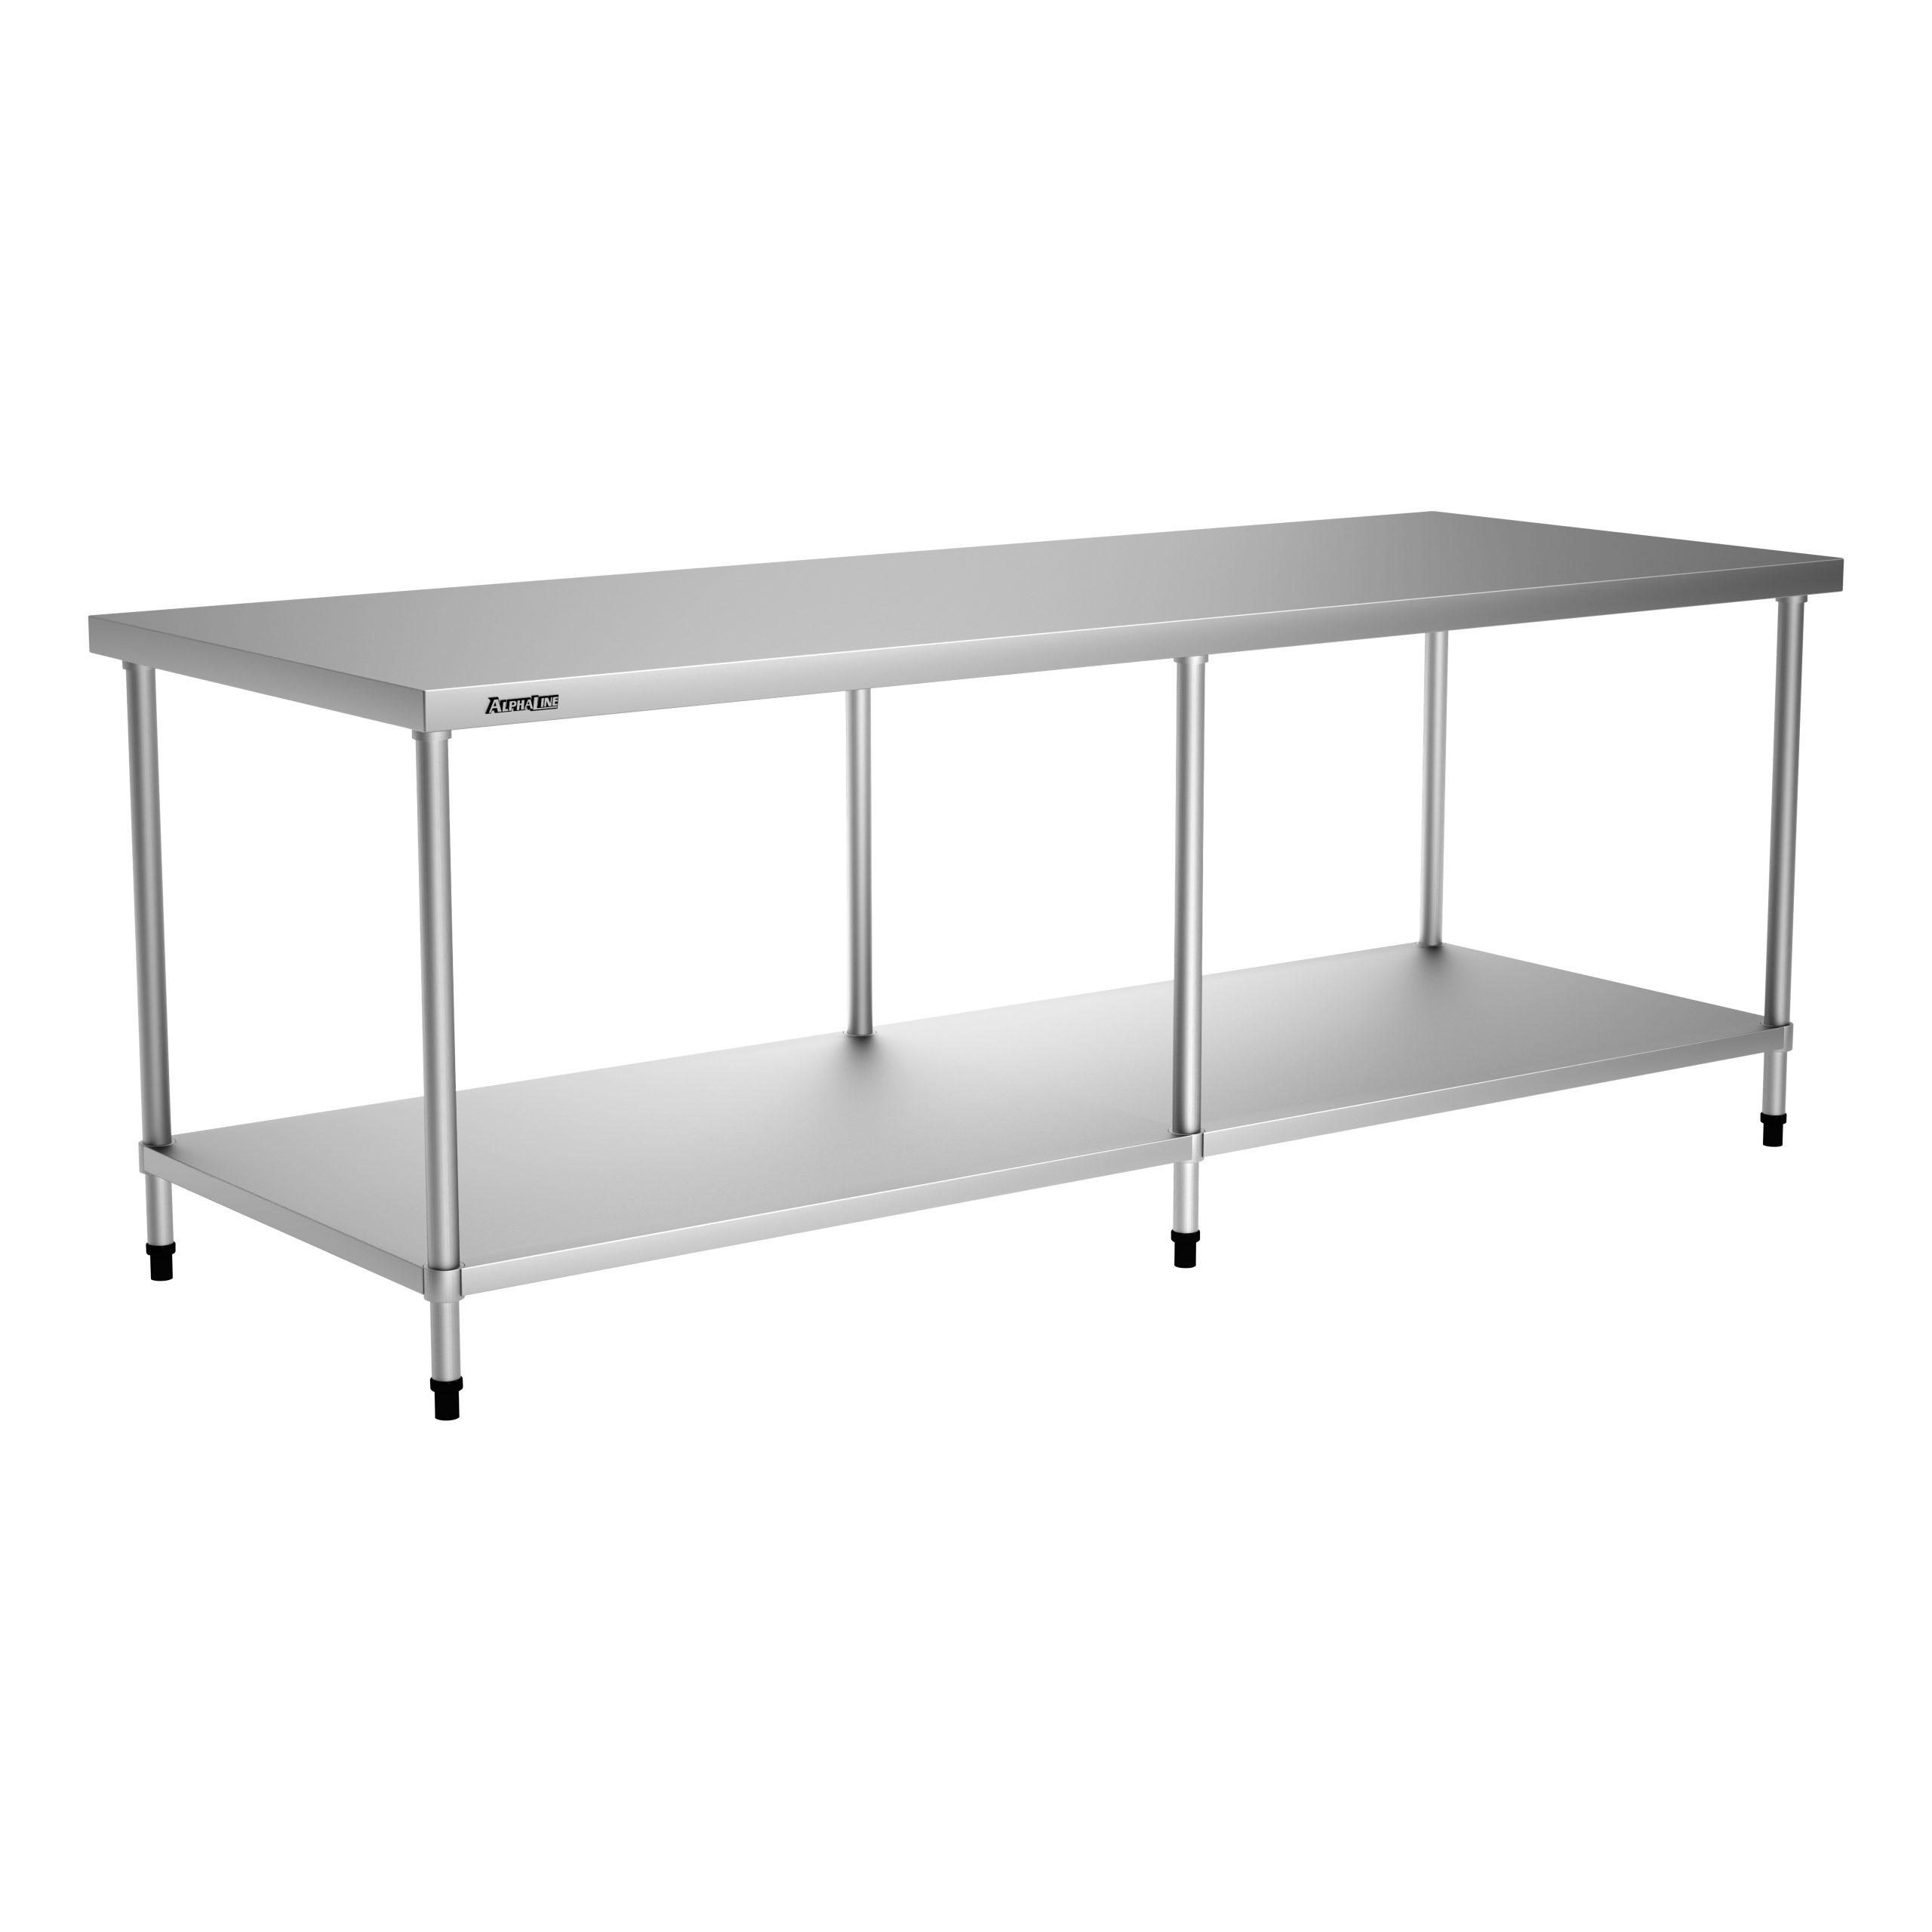 Stainless Steel Bench 2400 x 700